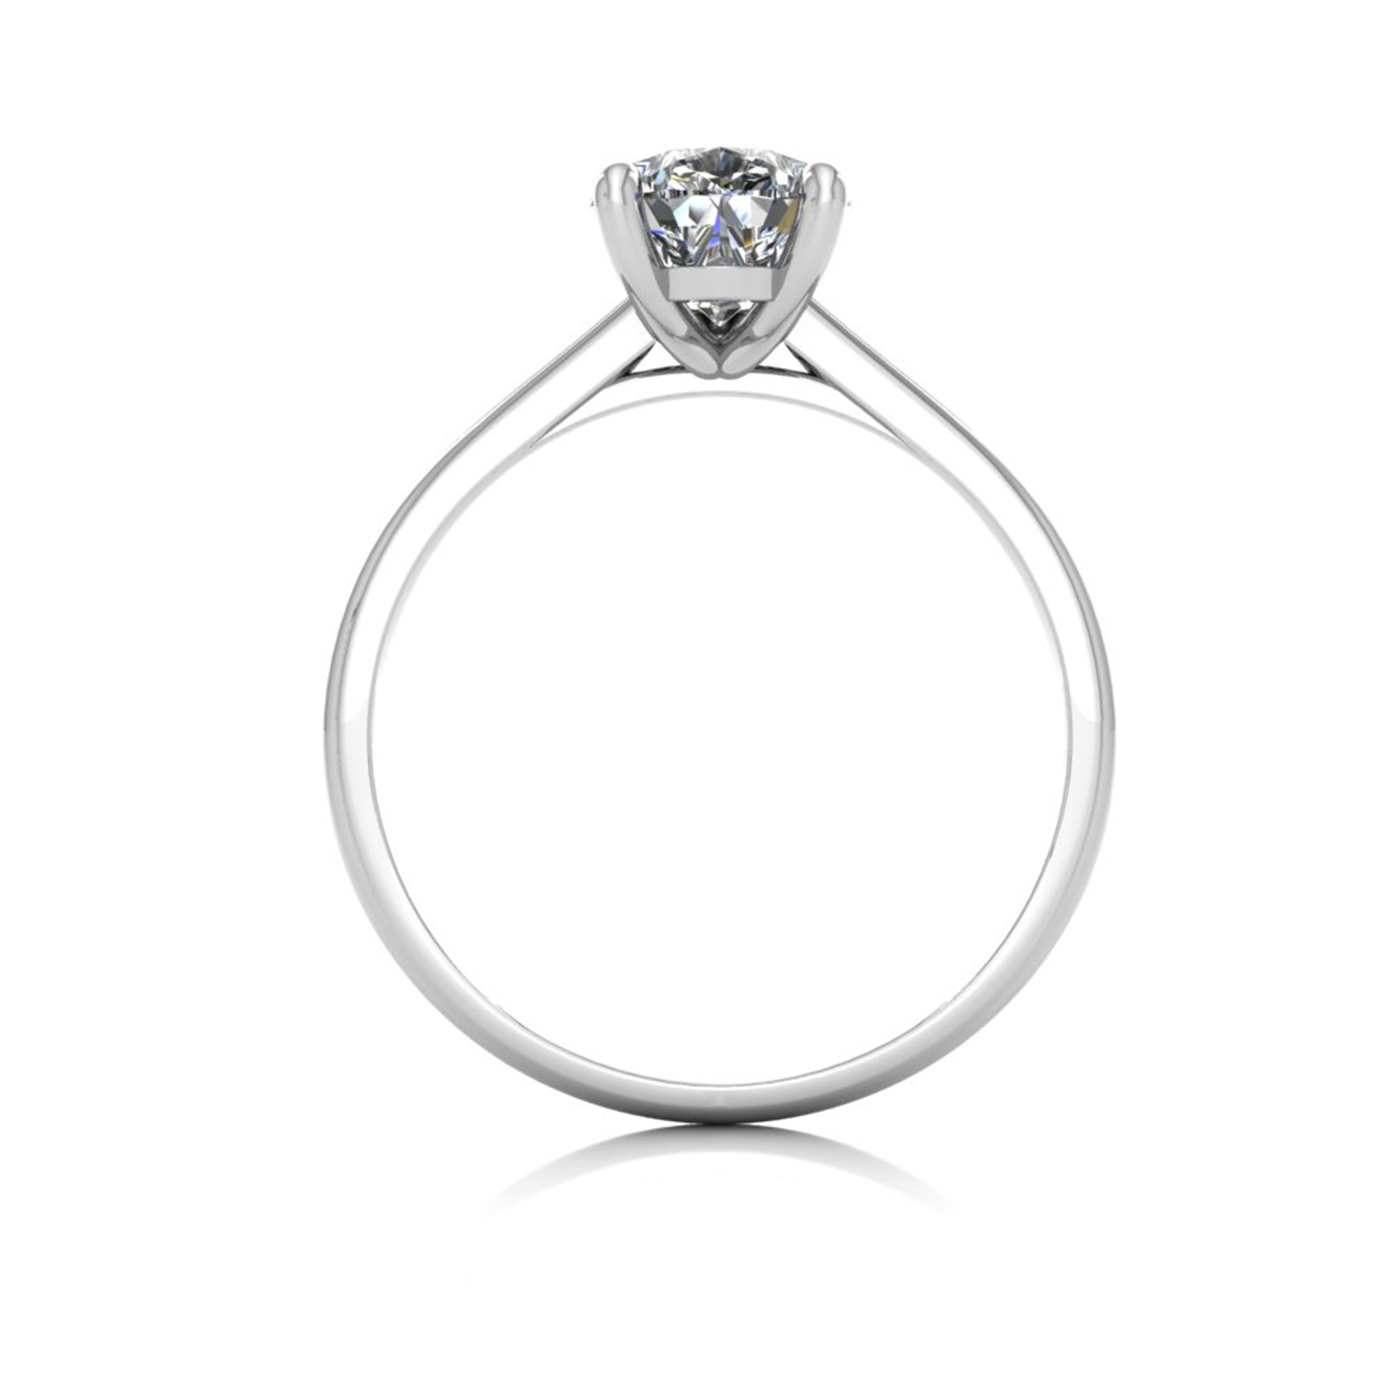 18k white gold  1,50 ct 3 prongs solitaire pear cut diamond engagement ring with whisper thin band